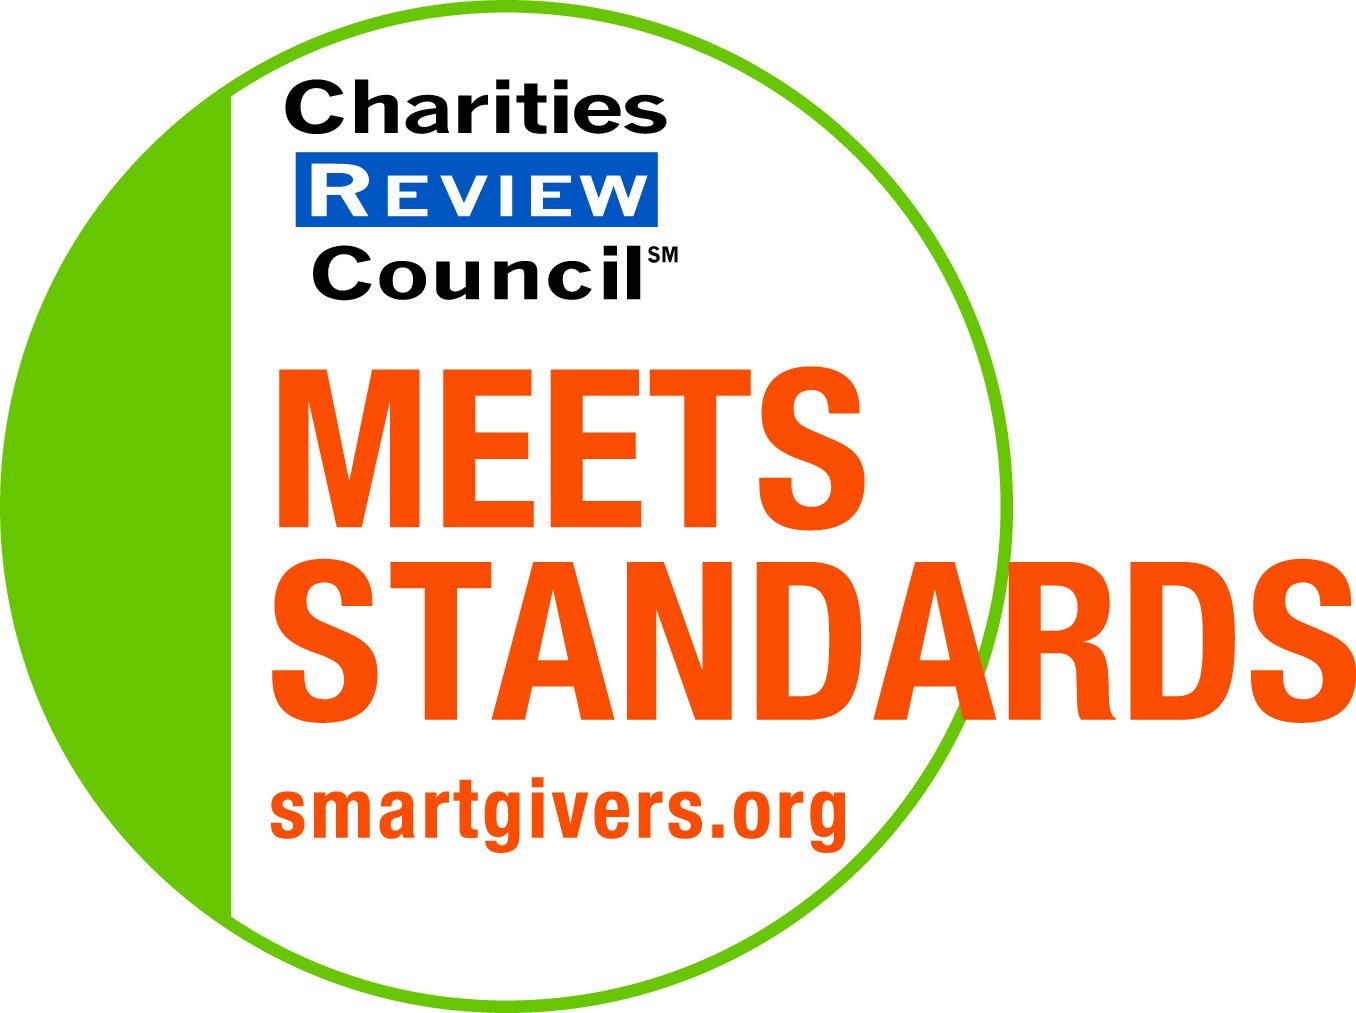 Charities Review Council Meets Standards certification logo.